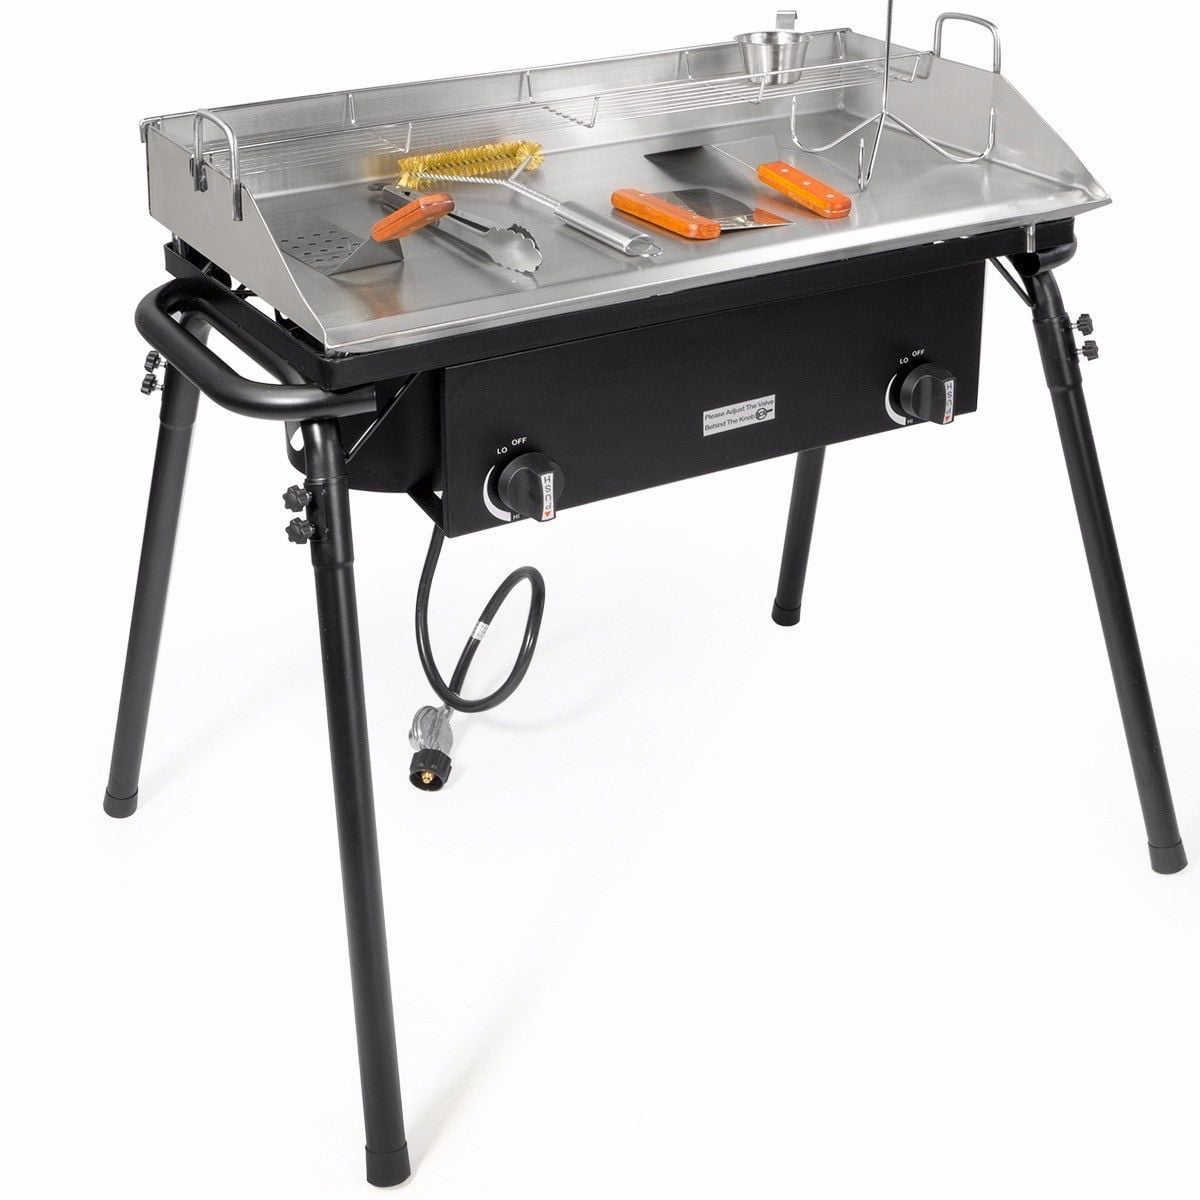 VANSTON 2-Burner Propane Camping Stove, 20,000 Total BTUs Portable Gas  Camping Grill, Stovetop with Adjustable Burners, Wind Guards, Heavy-Duty  Latch